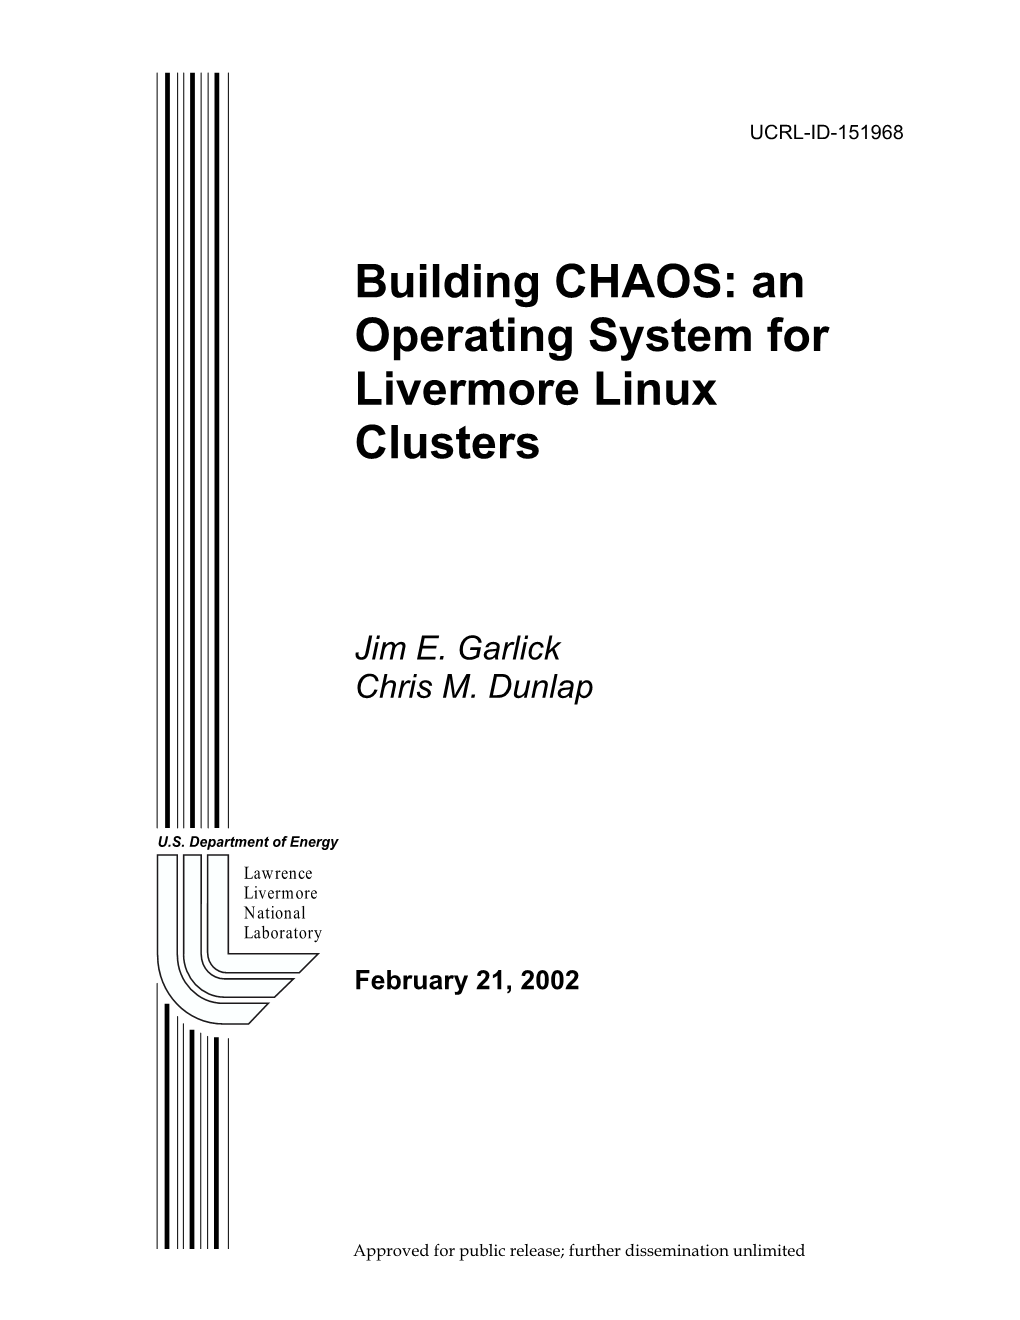 Building CHAOS: an Operating System for Livermore Linux Clusters